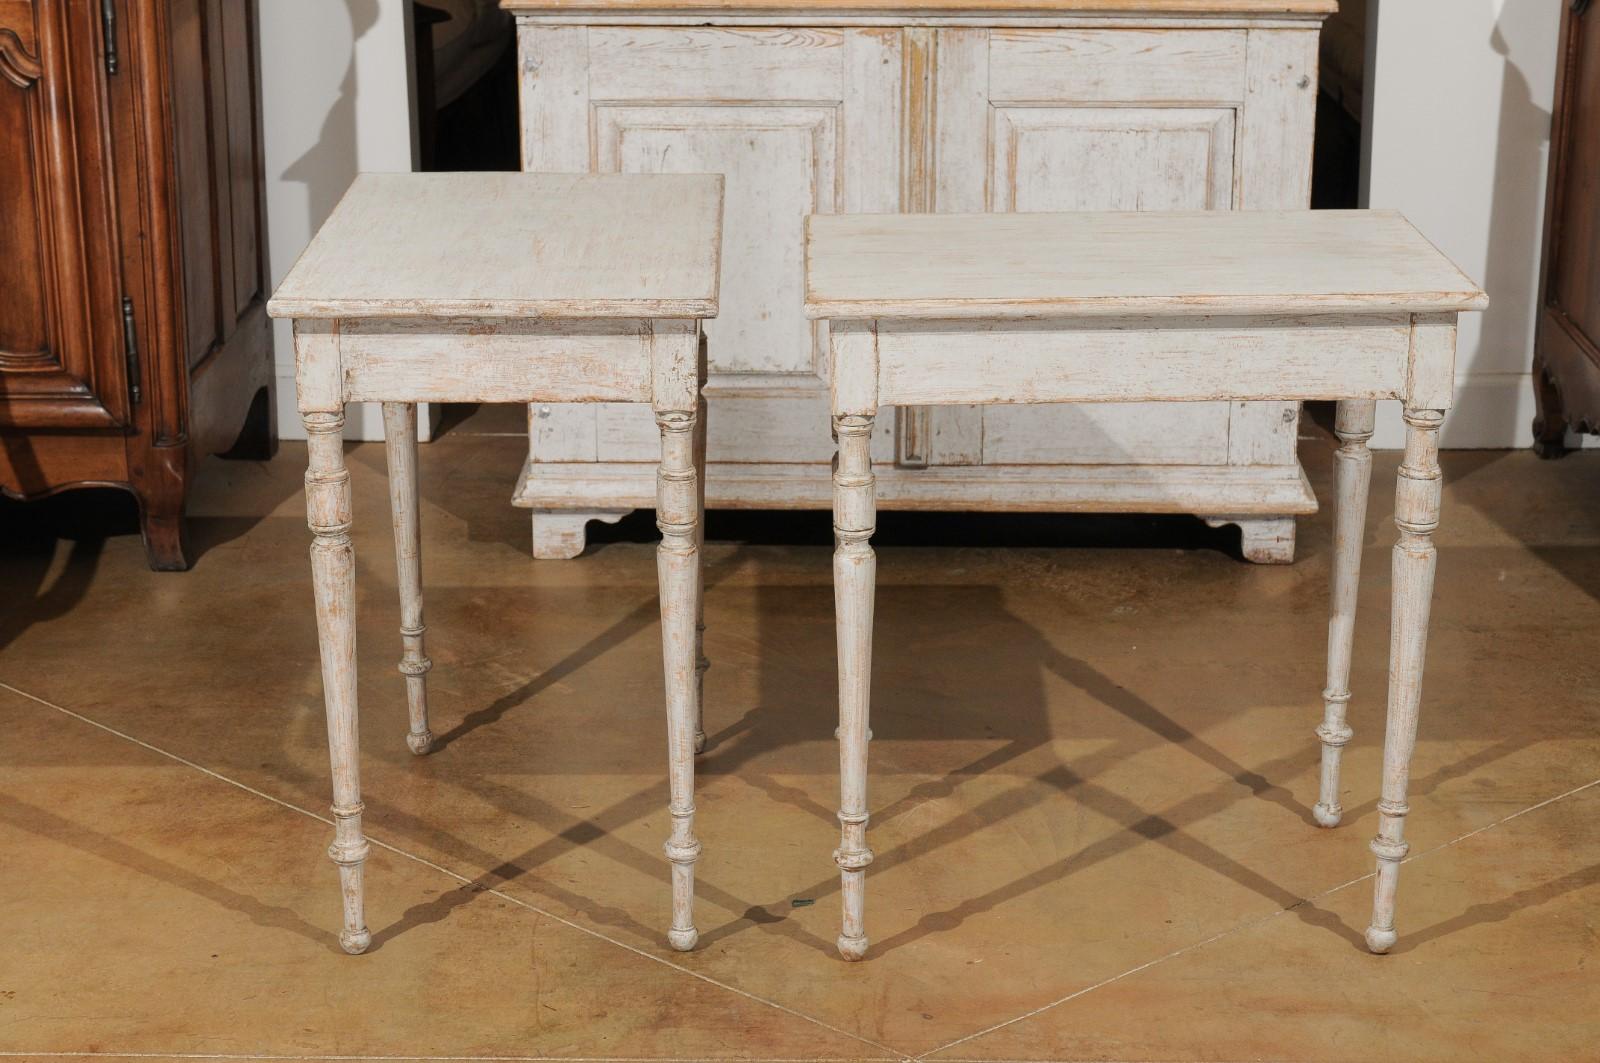 Wood Pair of Swedish 19th Century Tables with Turned Legs and Distressed Finish